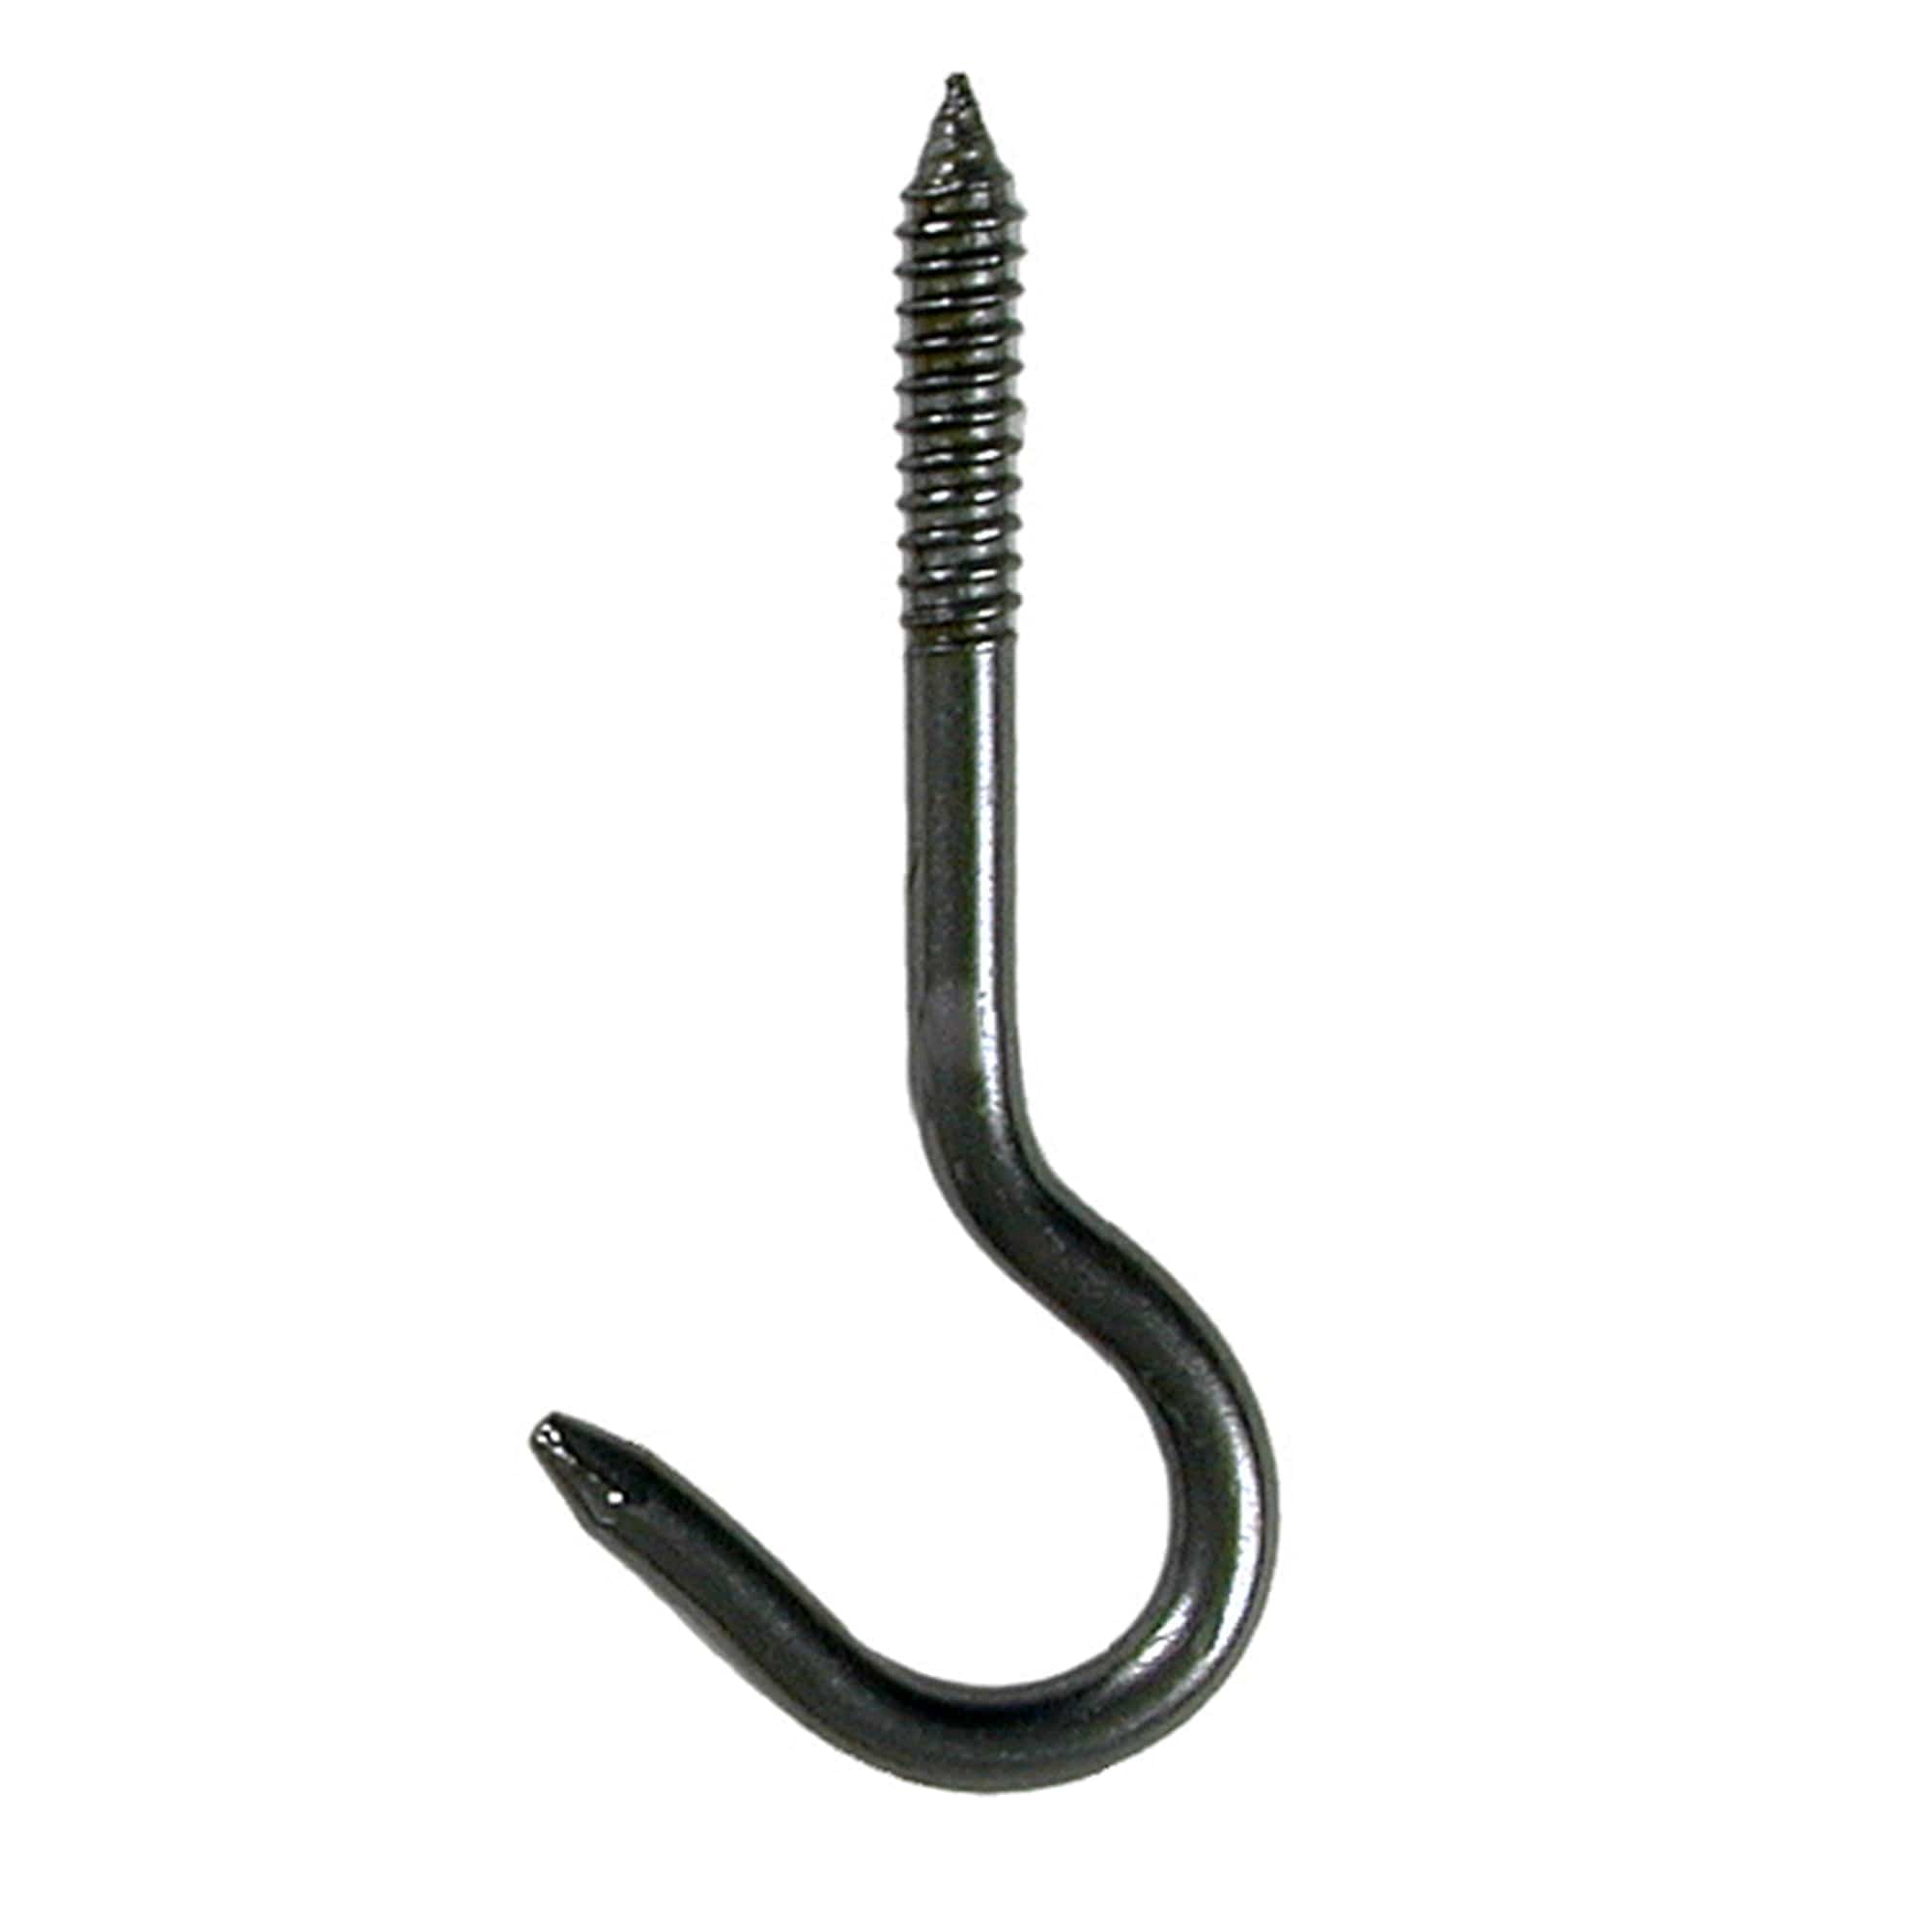 5 Ceiling Screw Hook - Enclume Design Products